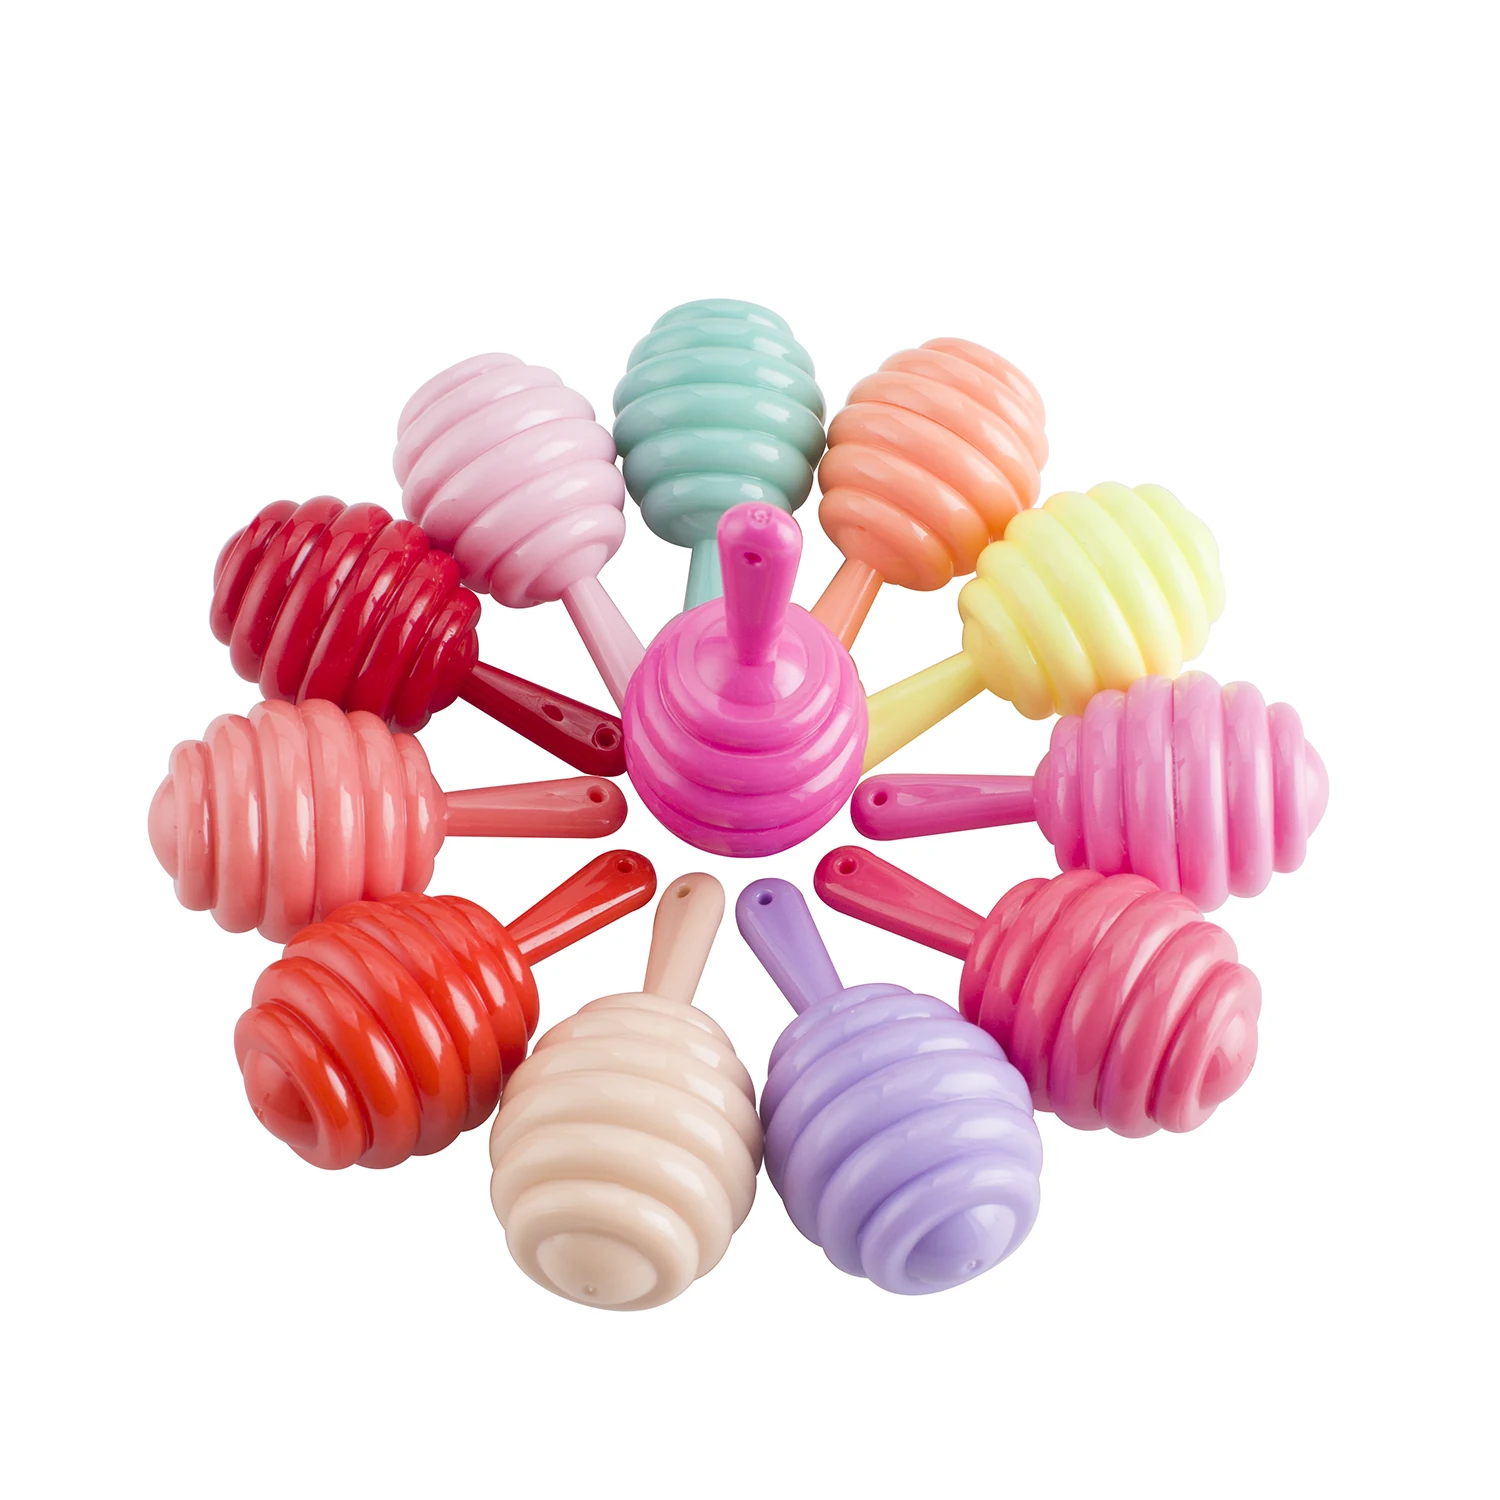 

Ready To Ship 12 colors Natural flavor Organic Cute Lollipop Lip Balm, 12 colors lollipop lip balm